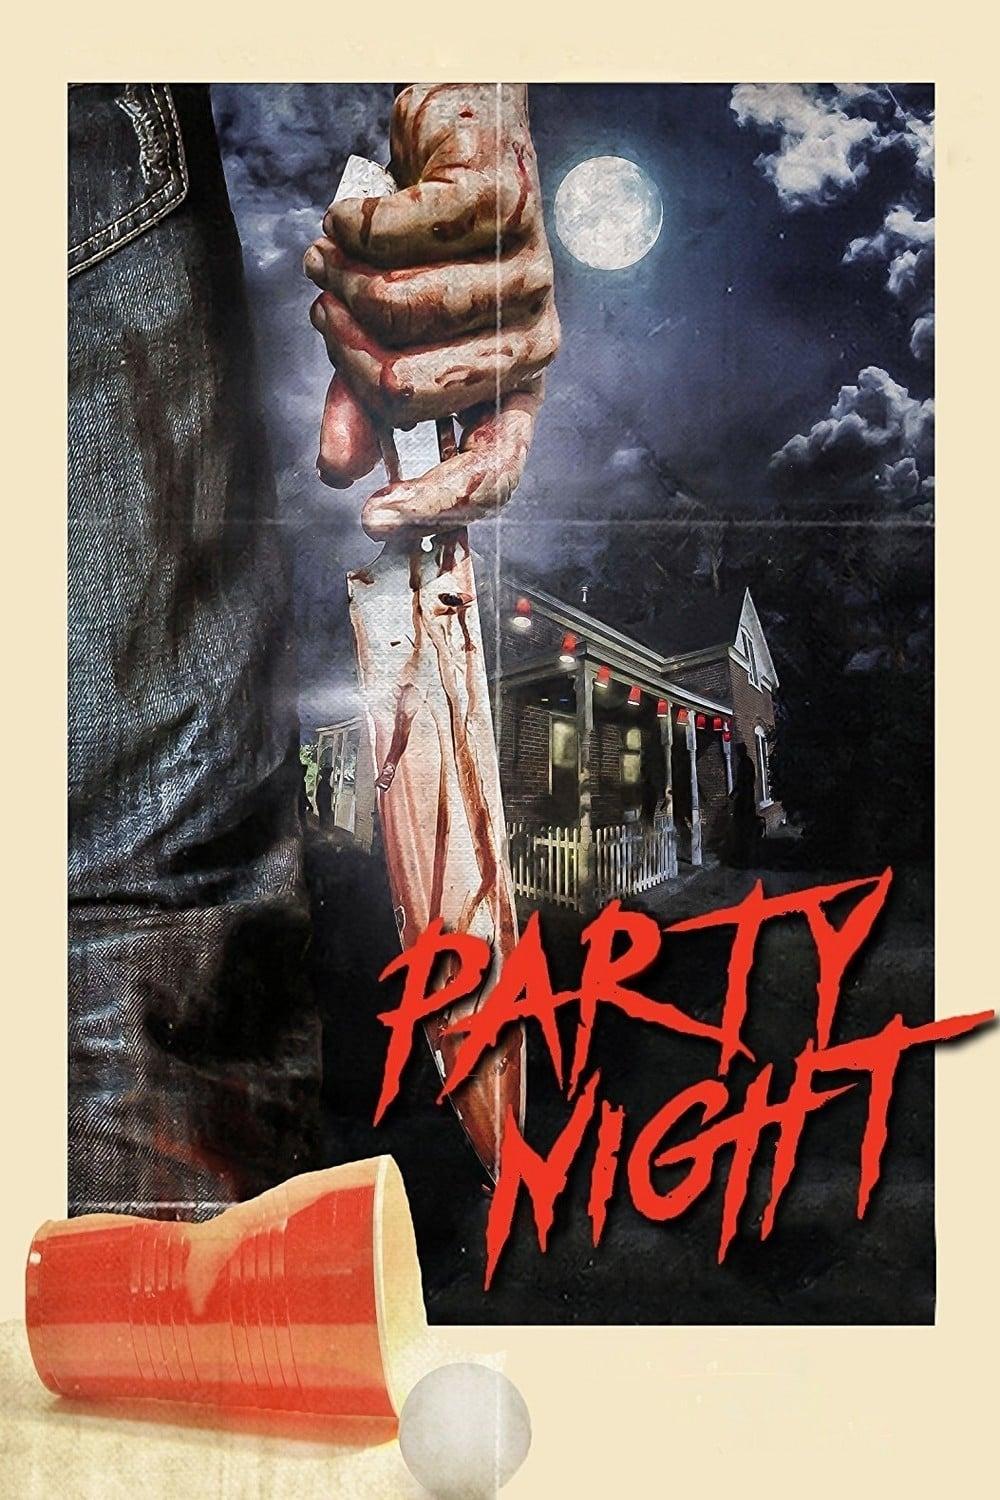 Party Night poster